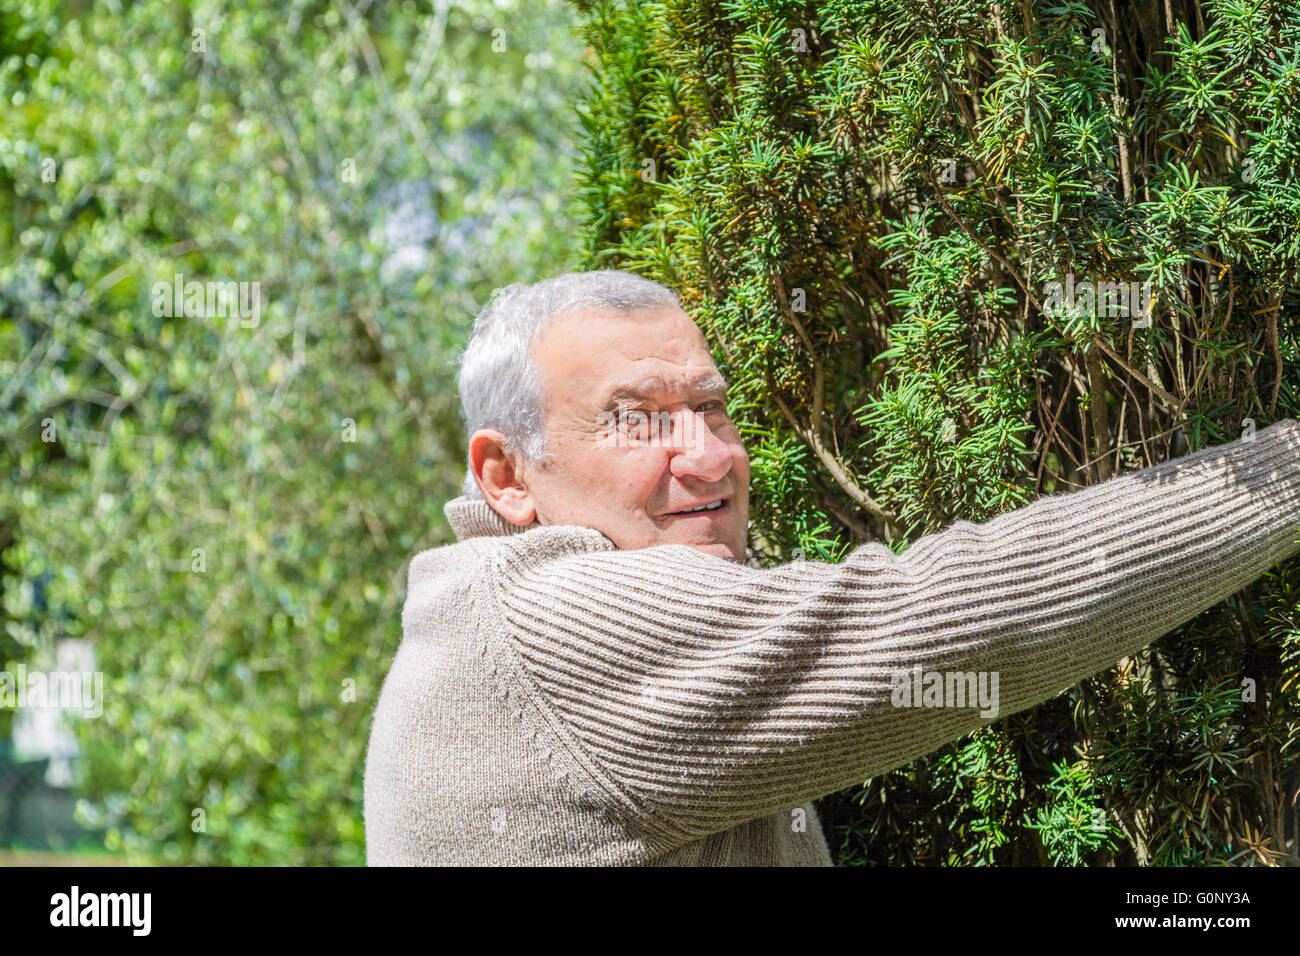 Elderly Caucasian in green garden embraces with affection a tall shrub Stock Photo